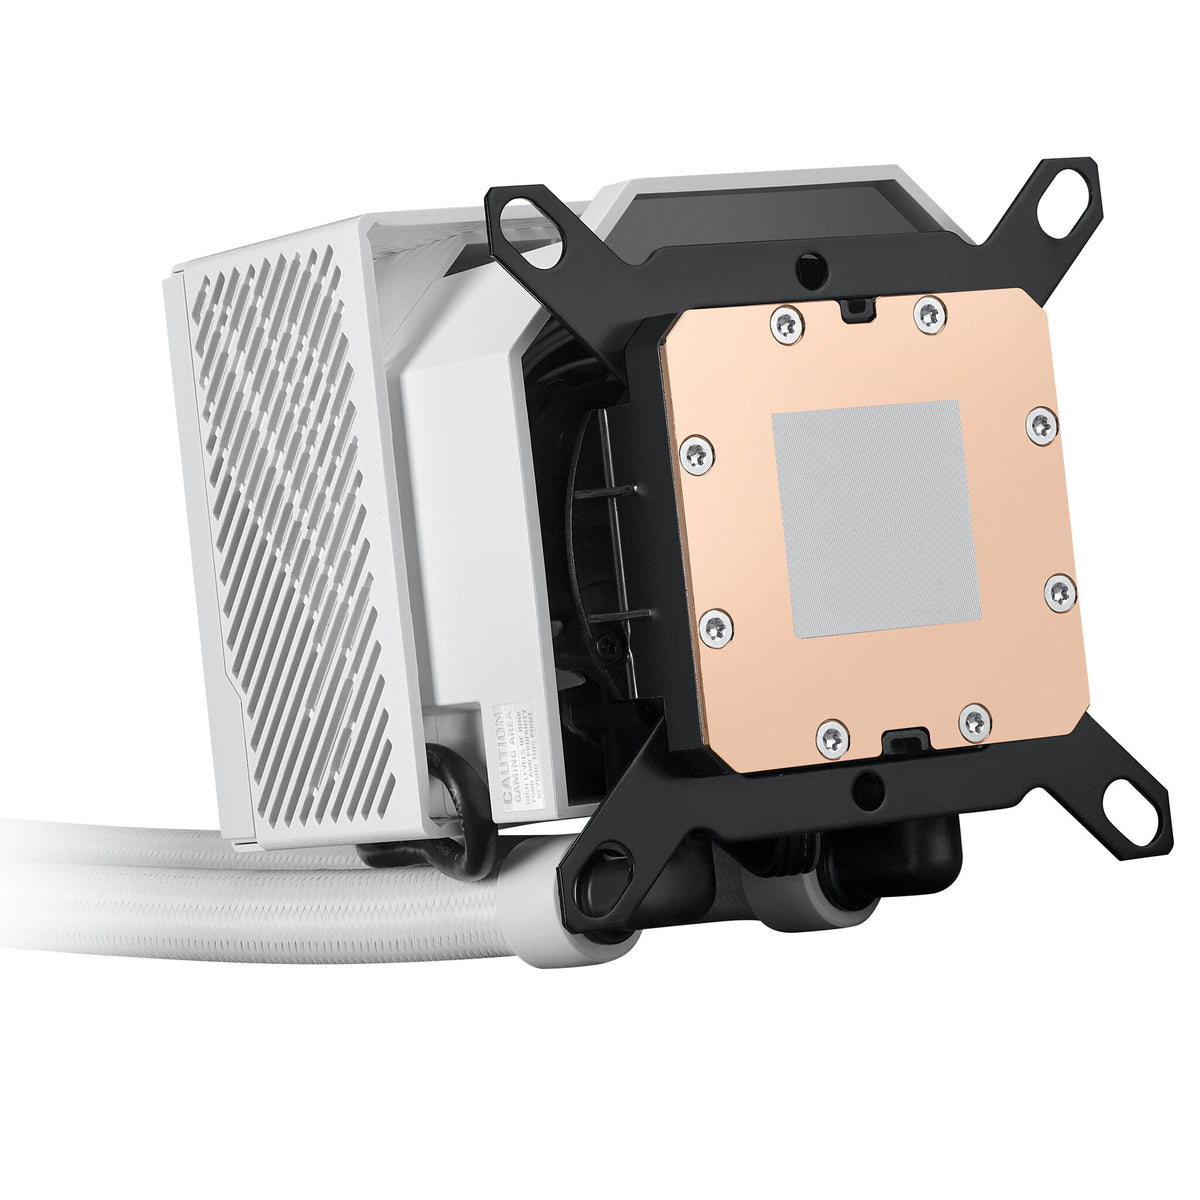 ASUS ROG RYUJIN III 240 ARGB &quot;White Edition&quot; - All-in-one Liquid Processor Cooler in White - 240mm